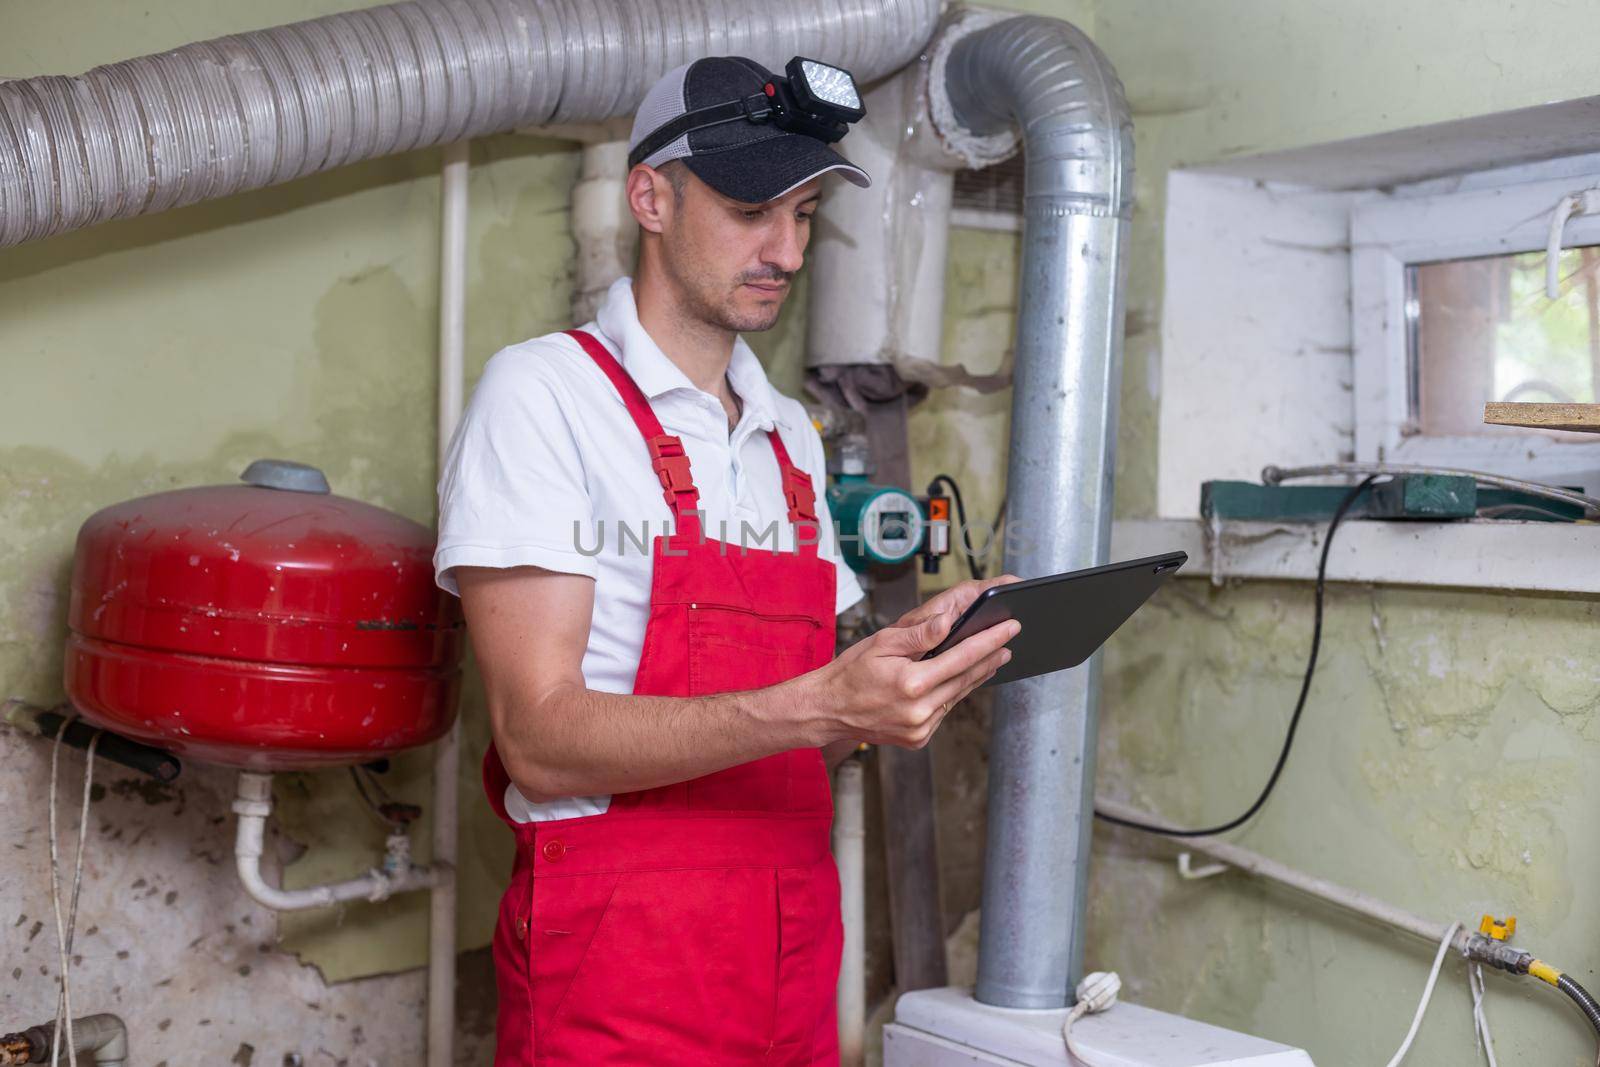 The technician checking the heating system in the boiler room with tablet in hand